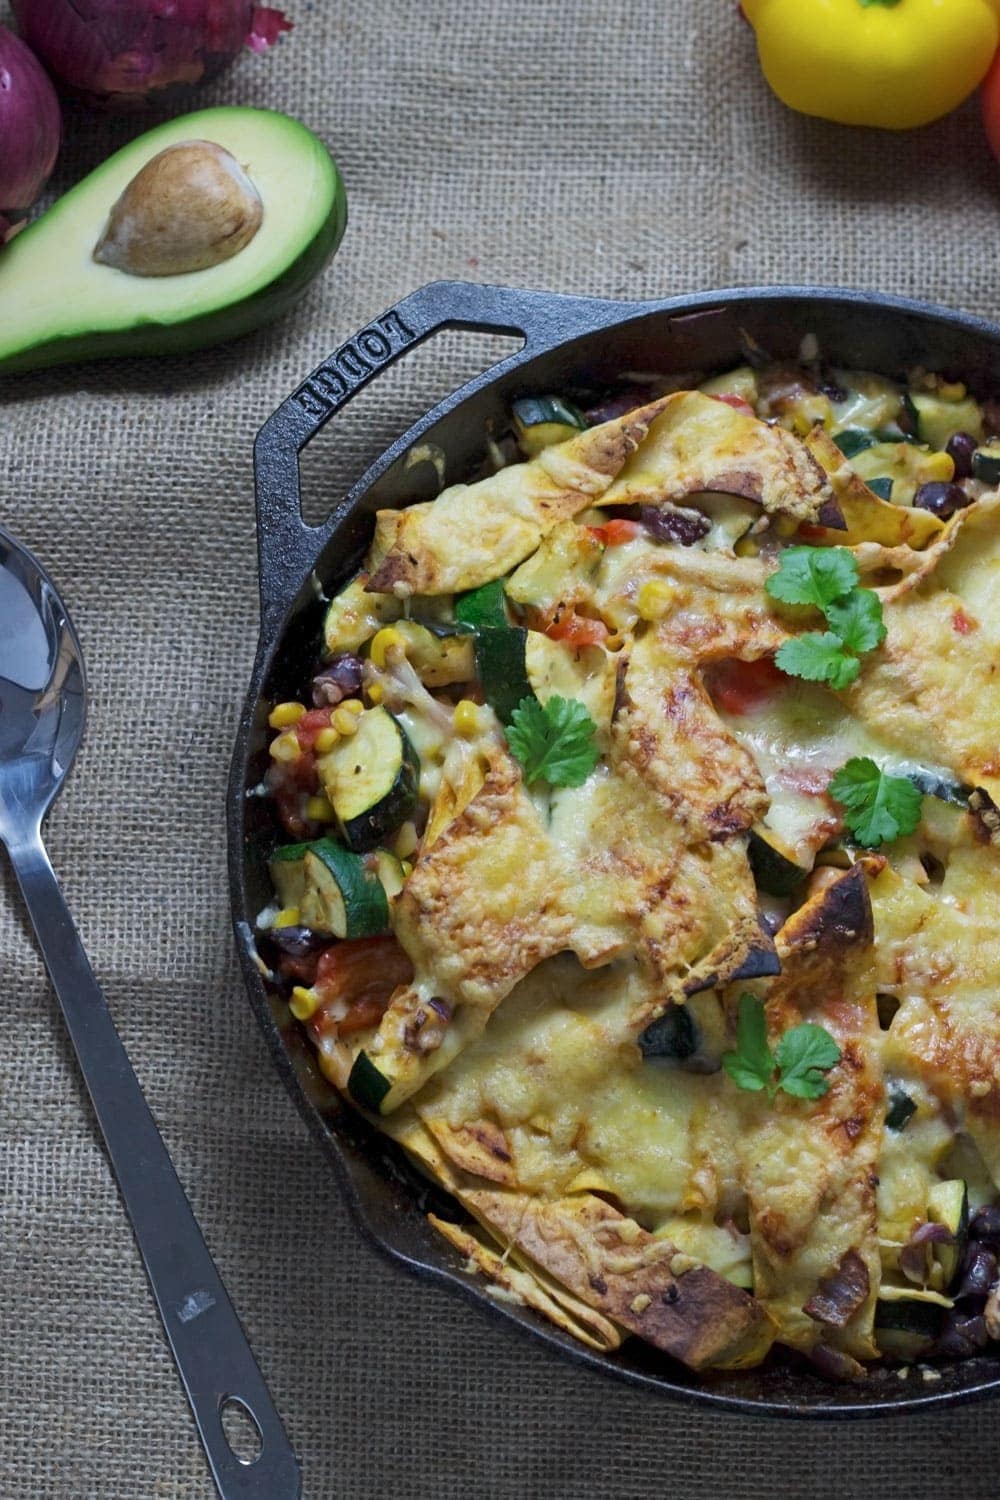 This veggie enchilada skillet is super healthy and full of spicy Mexican flavours! Perfect for a weeknight vegetarian dinner and great for leftovers too.